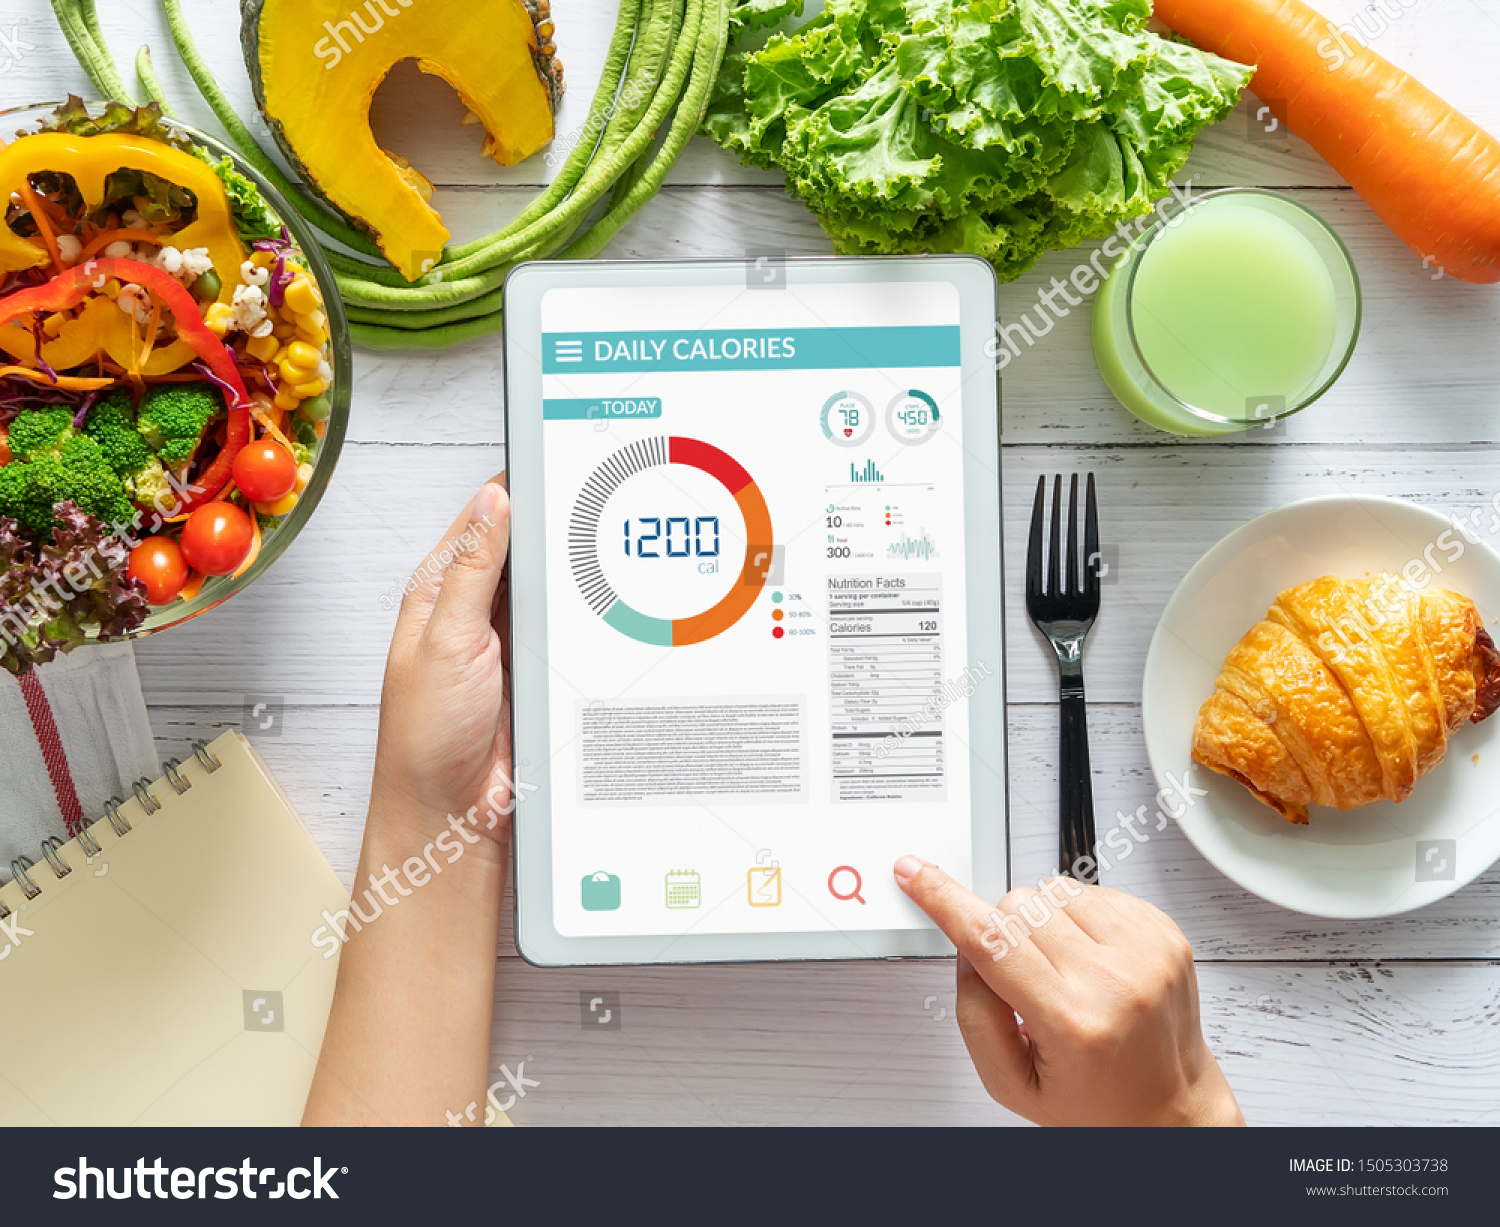 Calories counting , diet , food control and weight loss concept. woman using Calorie counter application on tablet at dining table with fresh vegetable salad #1505303738